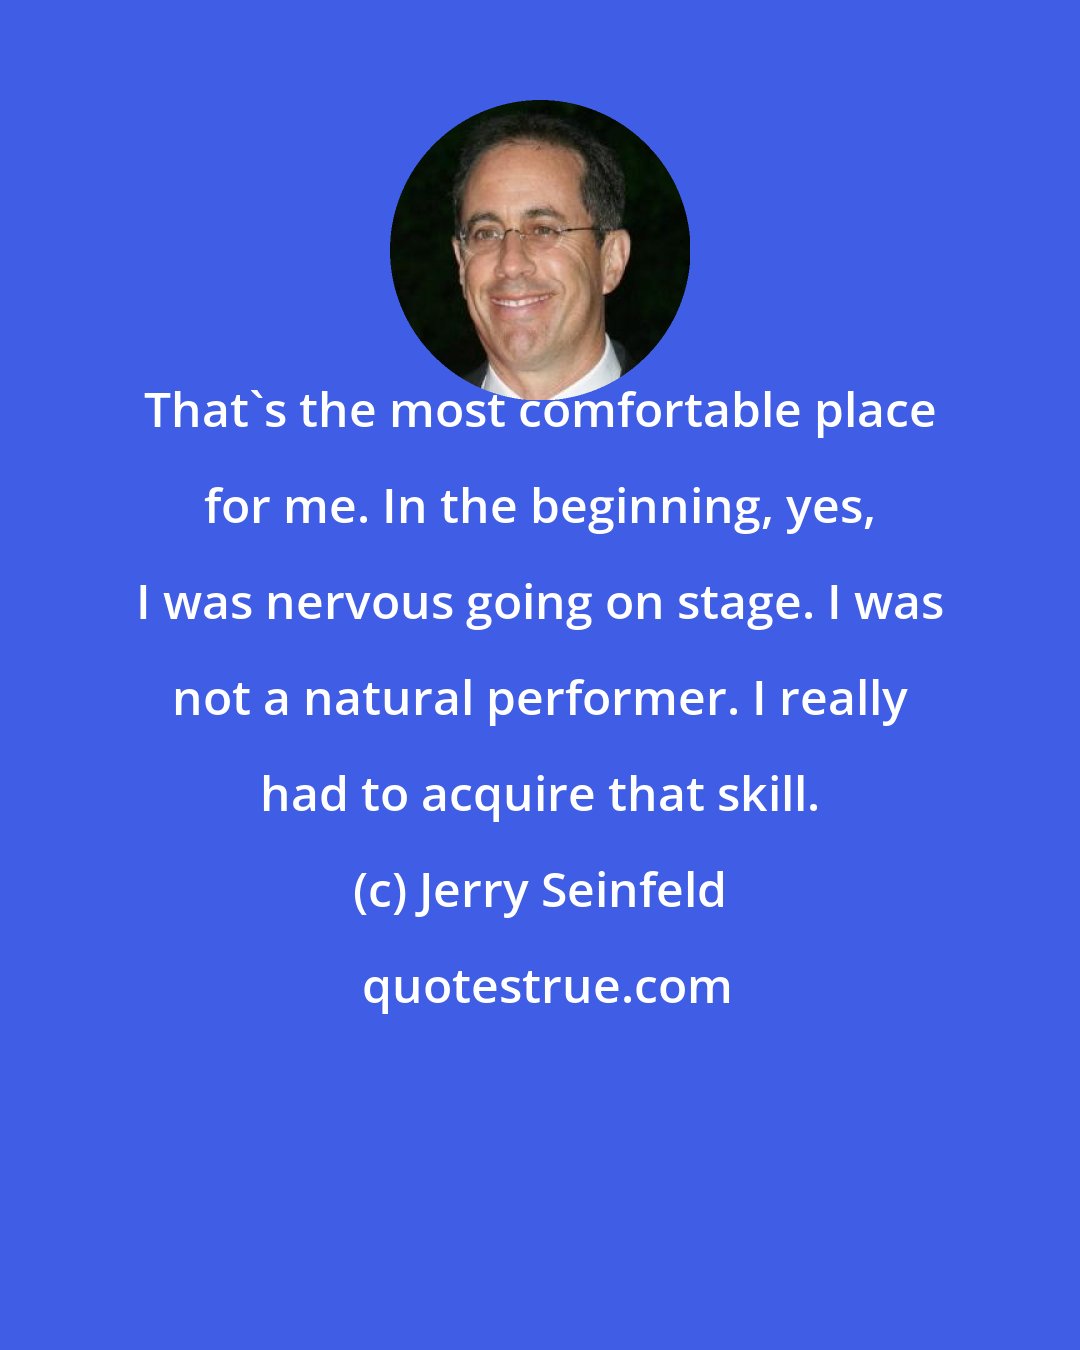 Jerry Seinfeld: That's the most comfortable place for me. In the beginning, yes, I was nervous going on stage. I was not a natural performer. I really had to acquire that skill.